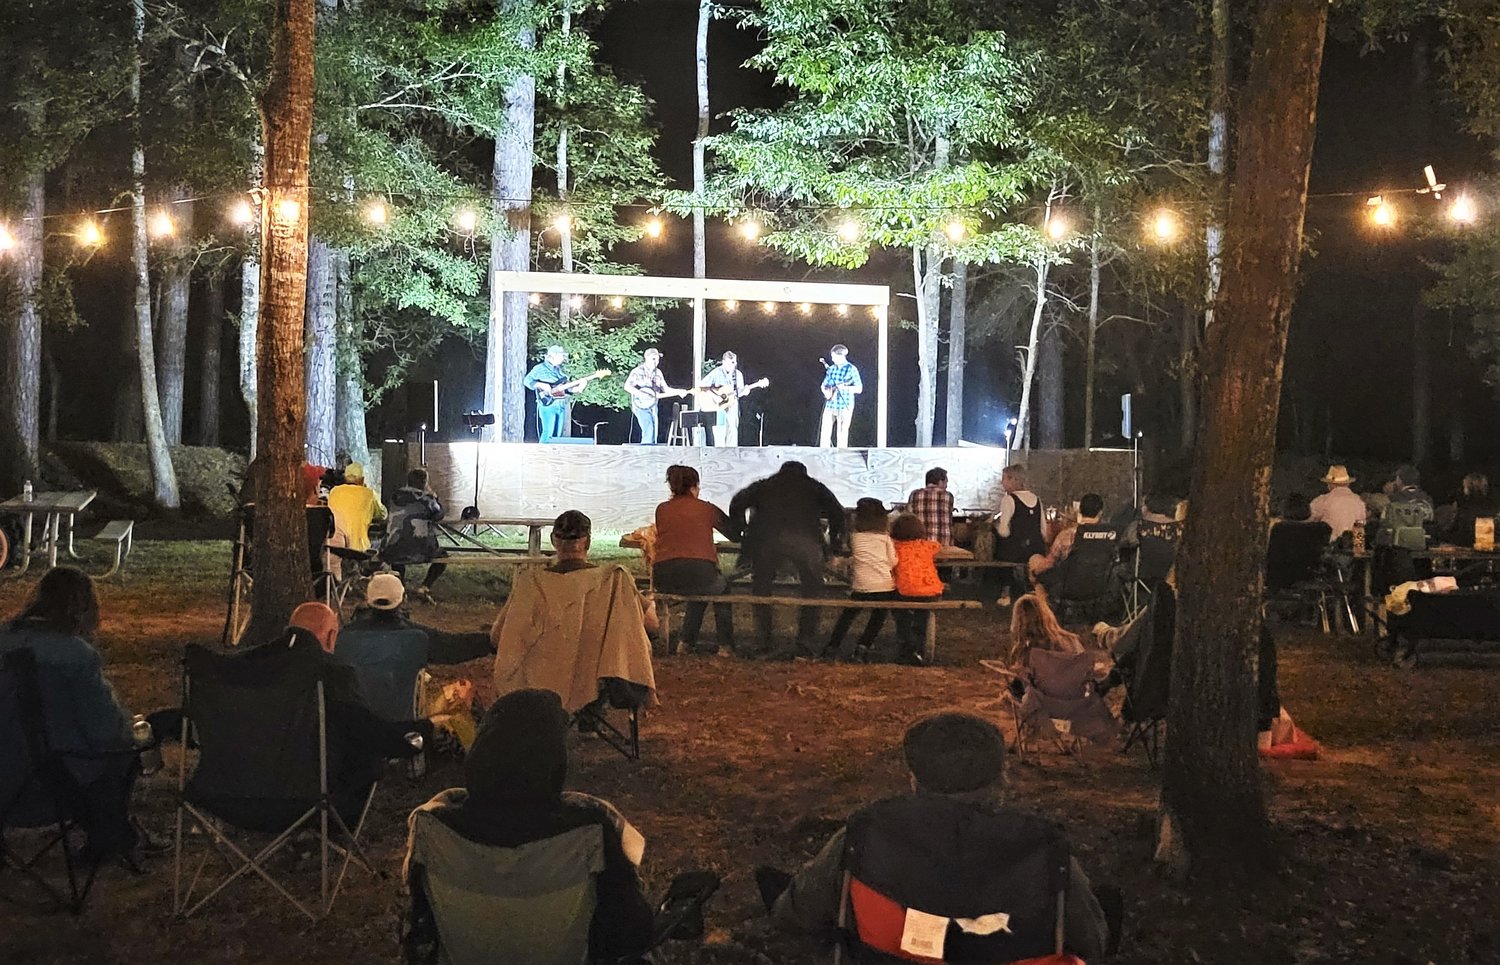 Once a month on a selected Friday throughout the spring, Historic Blakeley State Park hosts an evening of family-friendly live performances.